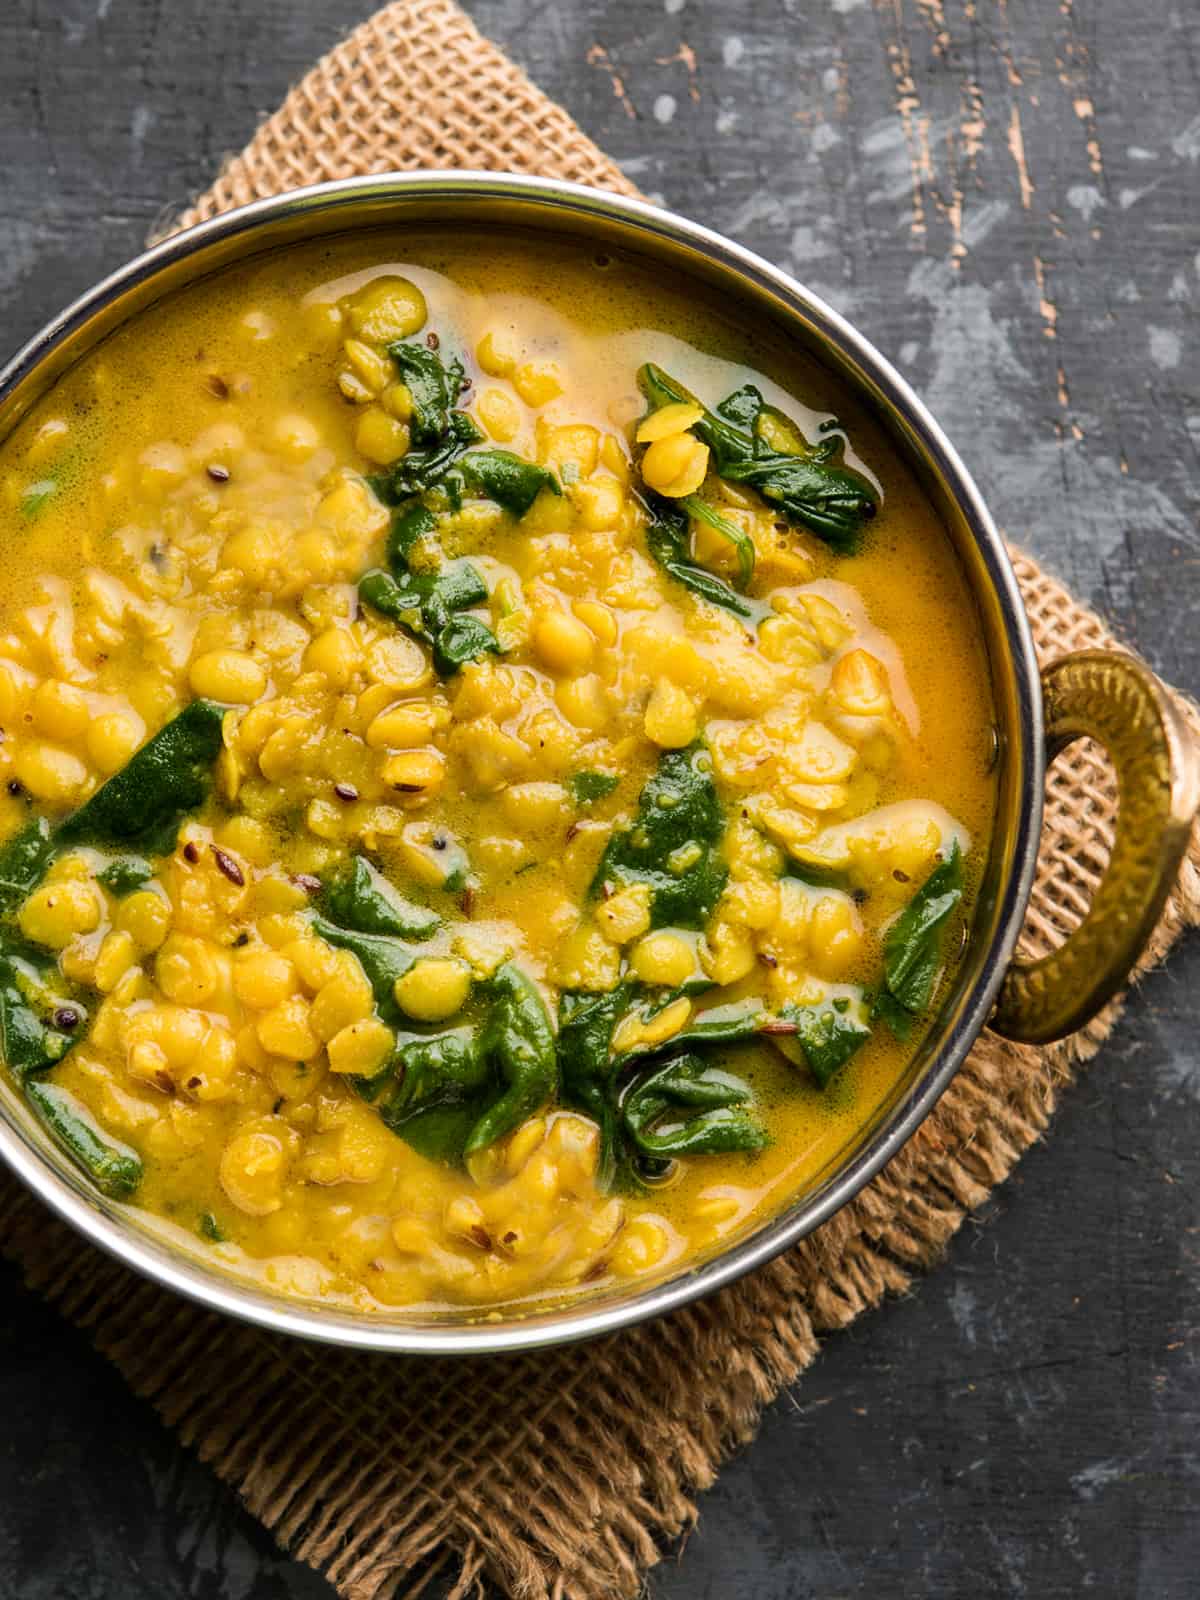 dal palak recipe indian lentil and spinach curry authentic traditional